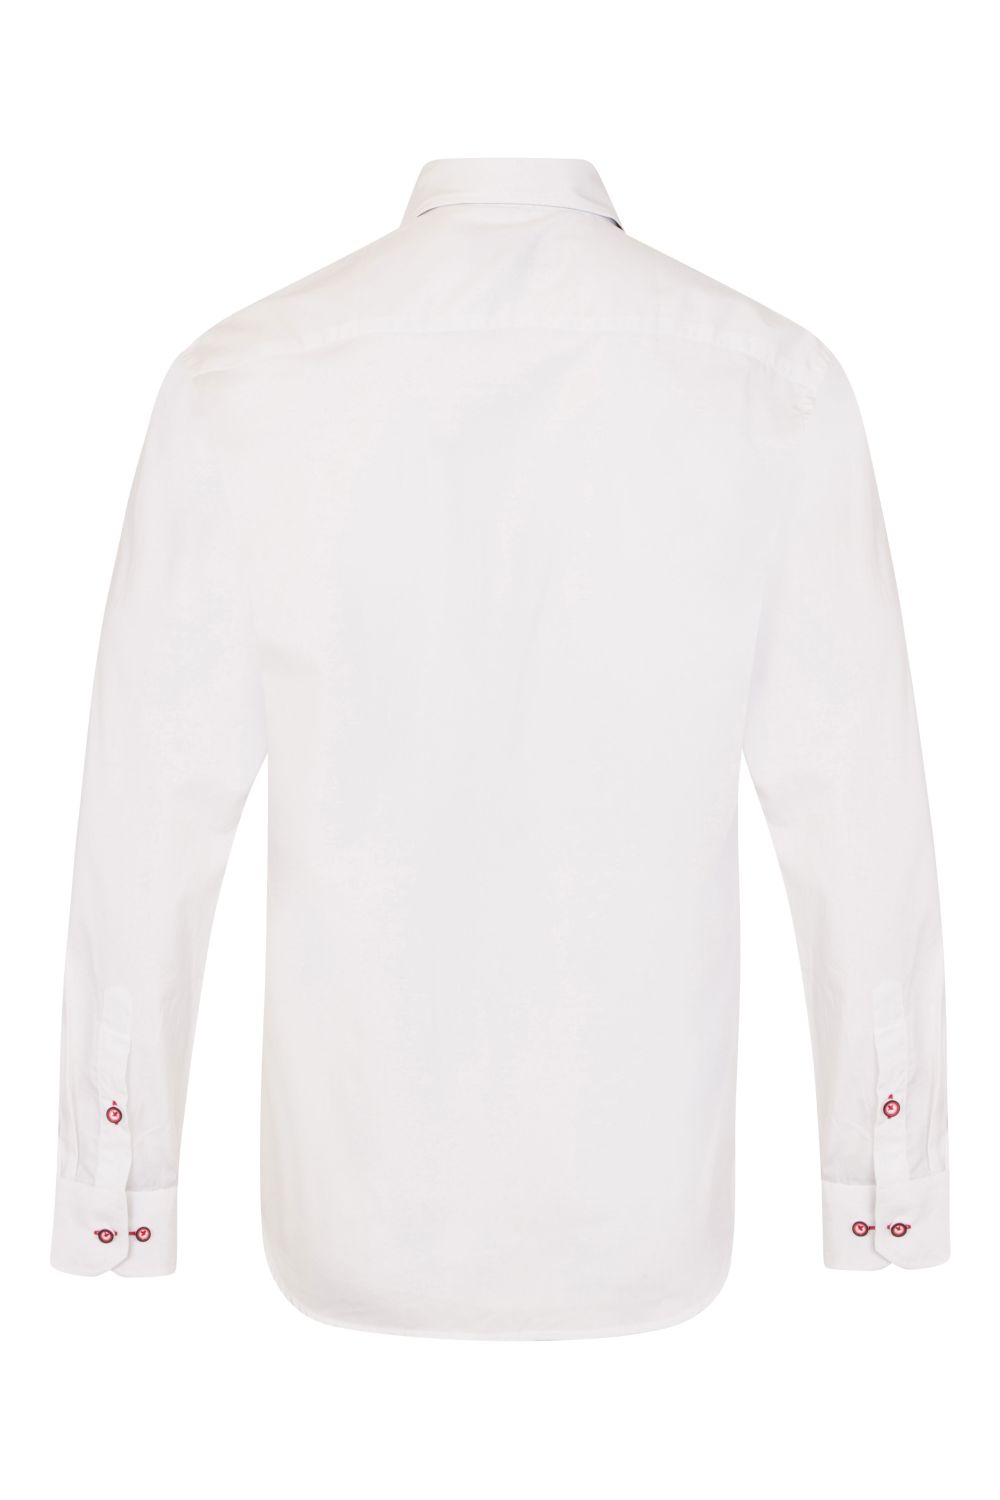 Plain White Regular Fit Shirt with Blue & Red Paisley Trim